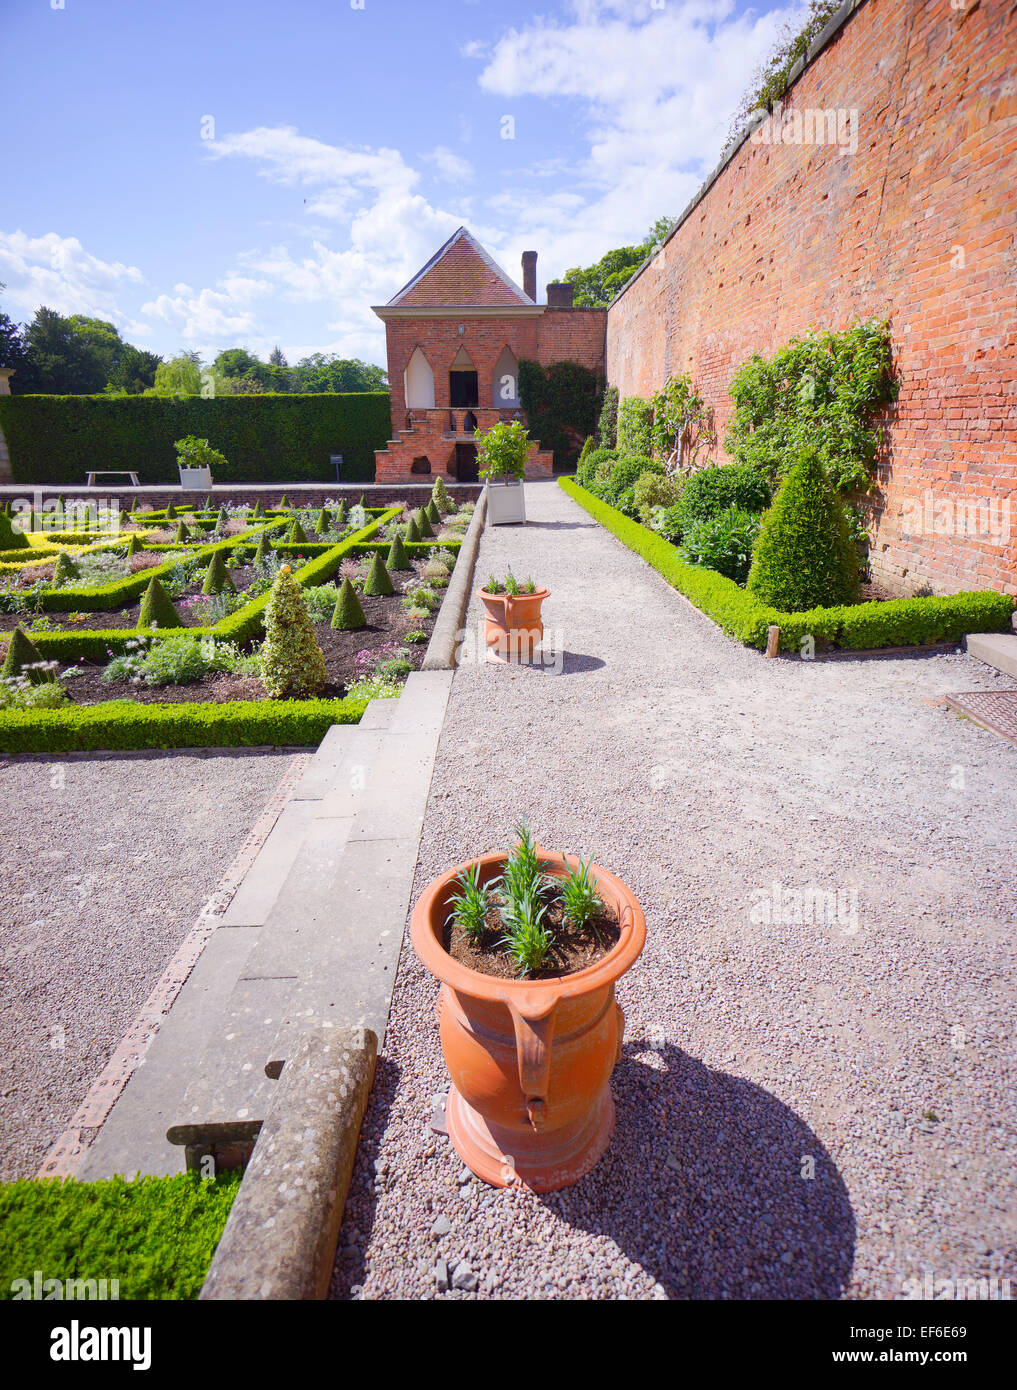 aristocracy, country, england, english, family, gardens, gb, hall, home, house, mansion, midlands, national, nobility, parterre, Stock Photo